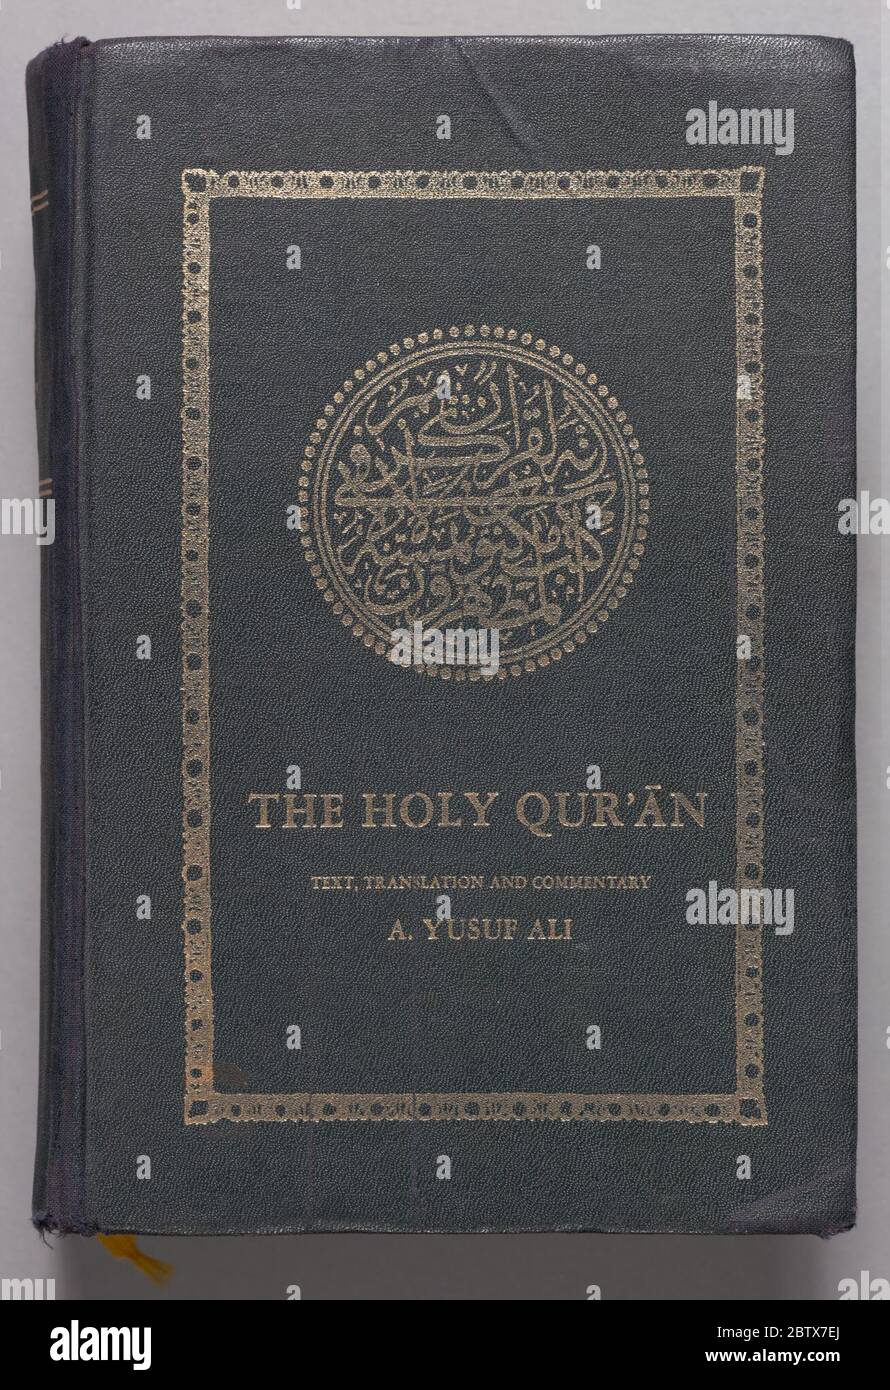 The Glorious Quran. This Qur'an (2015.133.2) is a thick hard-backed book  with a black cloth cover imprinted with gold inked letters and designs. The  front cover features a calligraphic circular design at